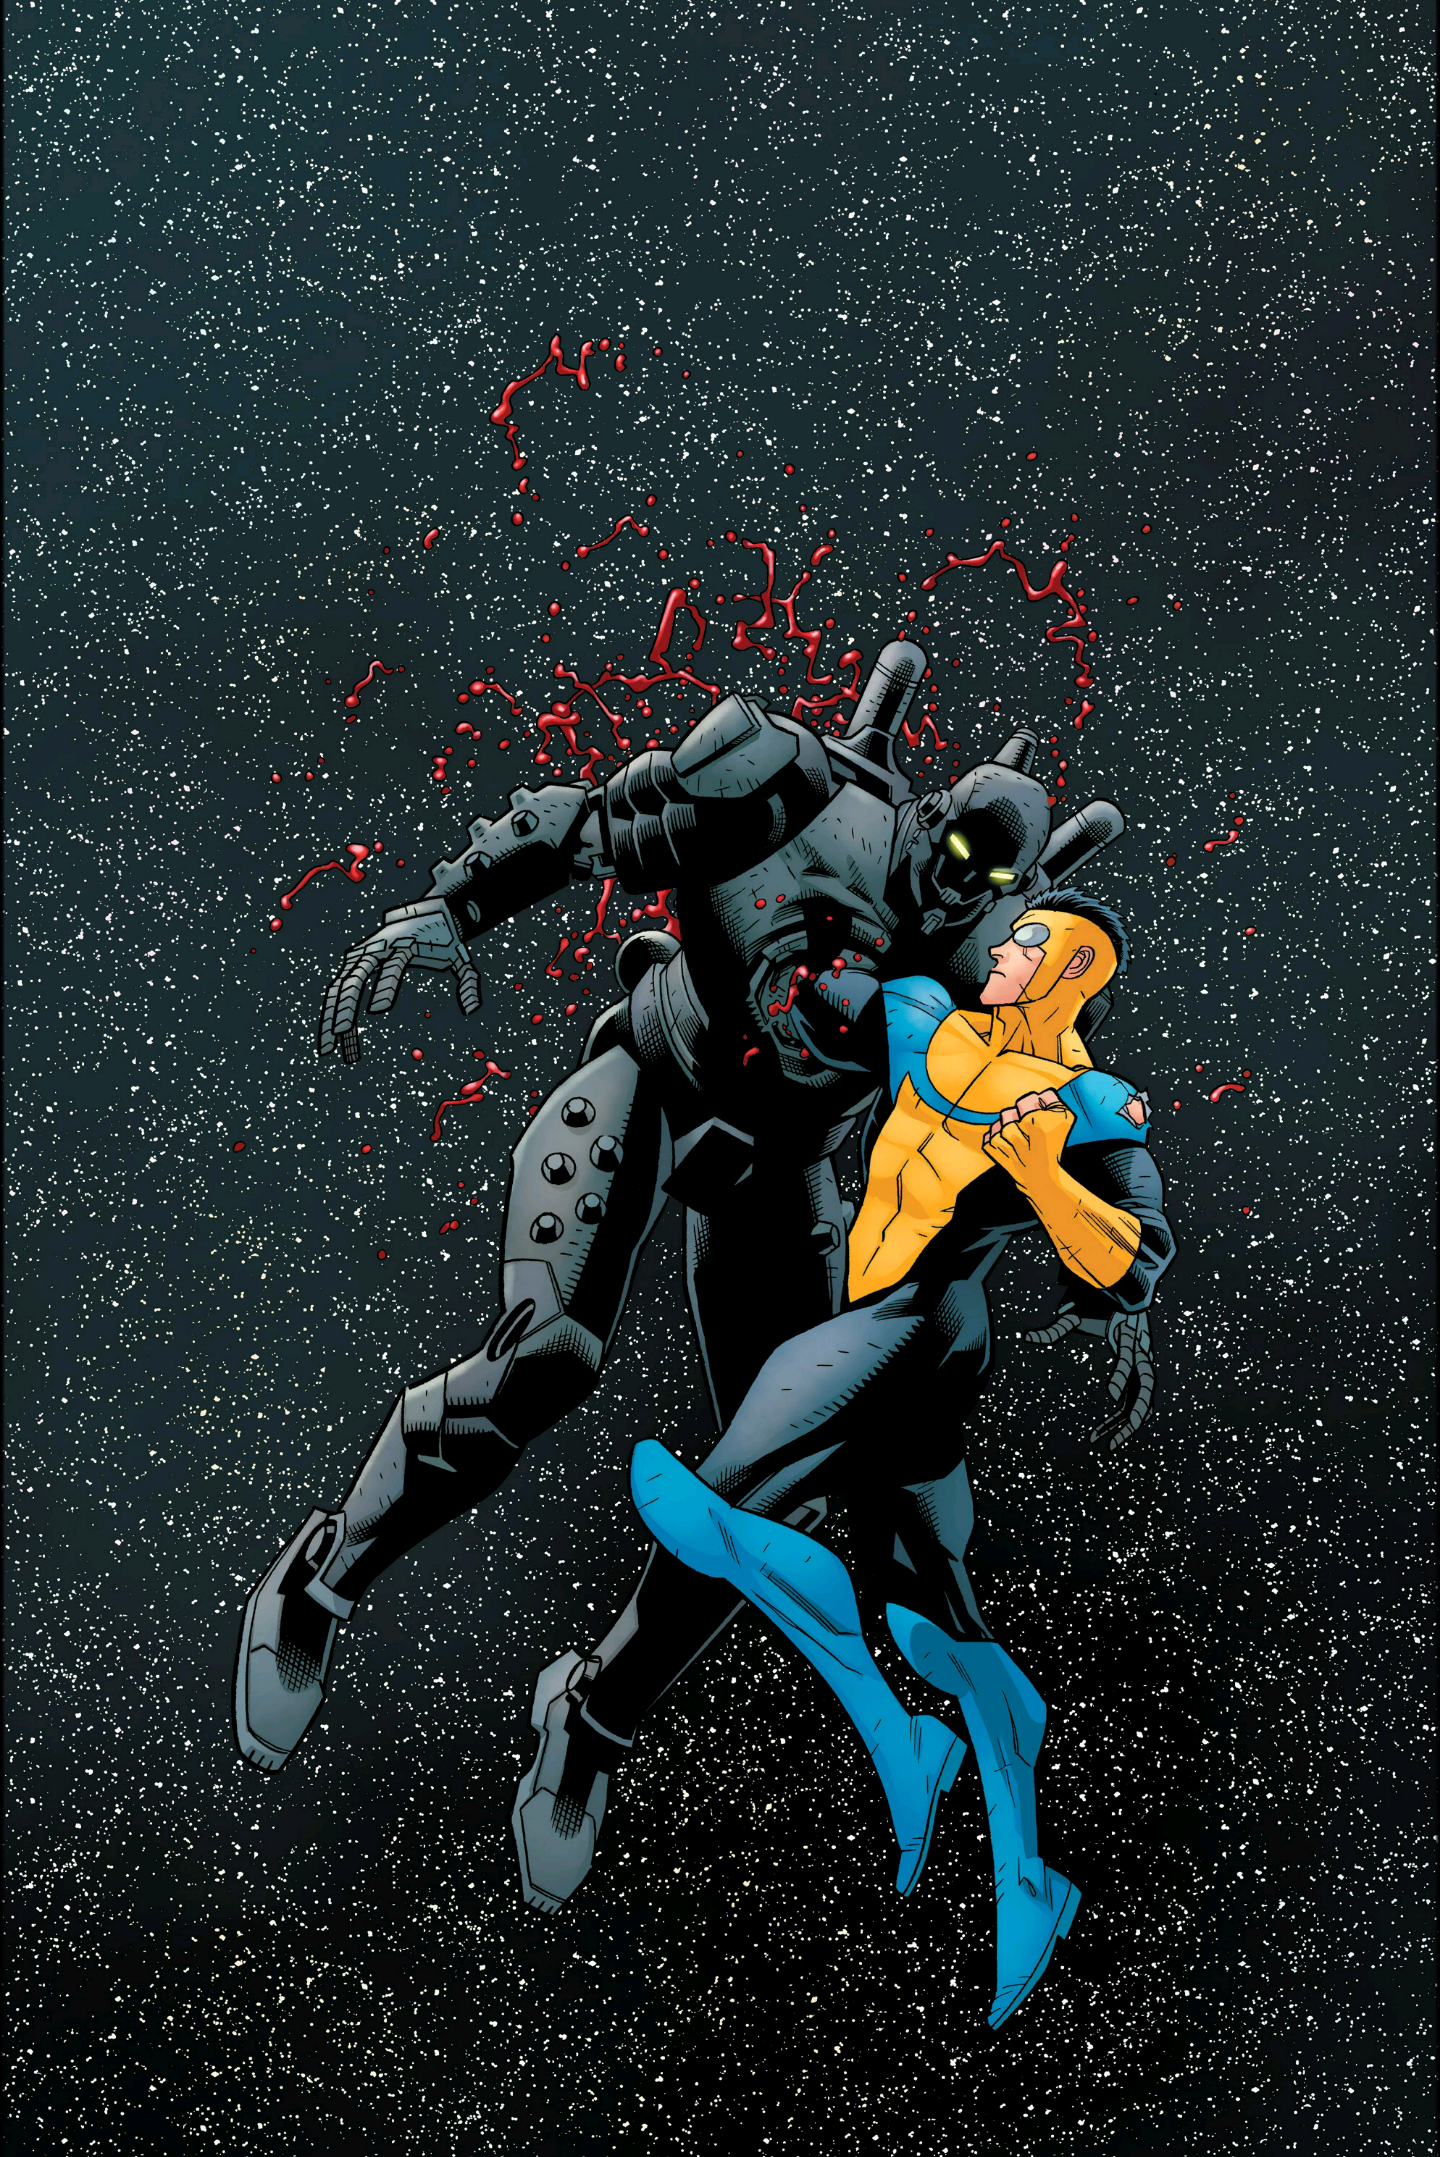 Awesome Invincible phone wallpaper